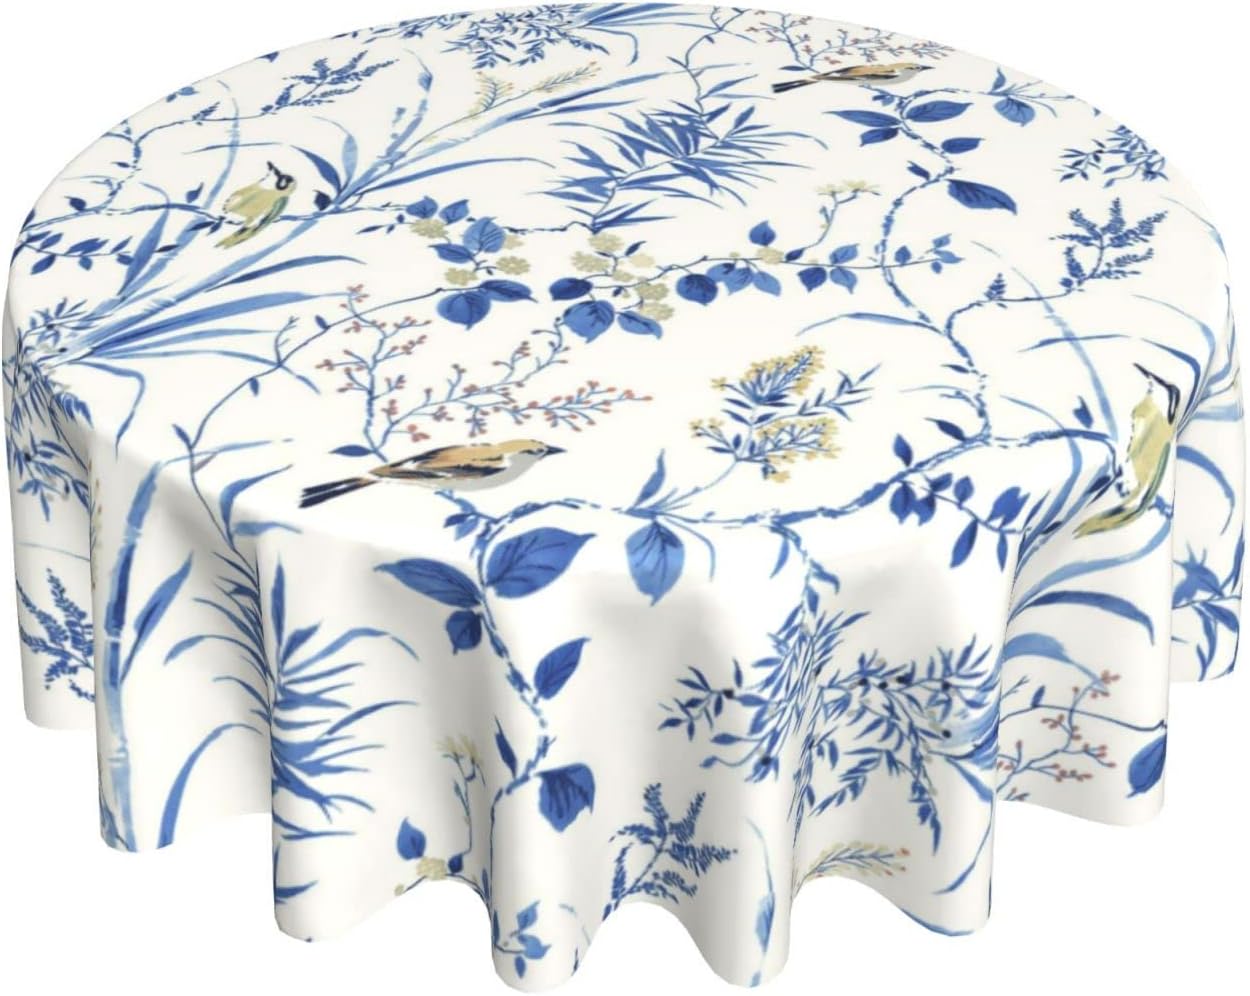 Sweetshow Blue Floral Tablecloth 60 Inch Round Wrinkle Free Flower Tablecloth Suitable for Kitchen Decorantion/Indoor and Outdoor Dining Table/Party/Picnic